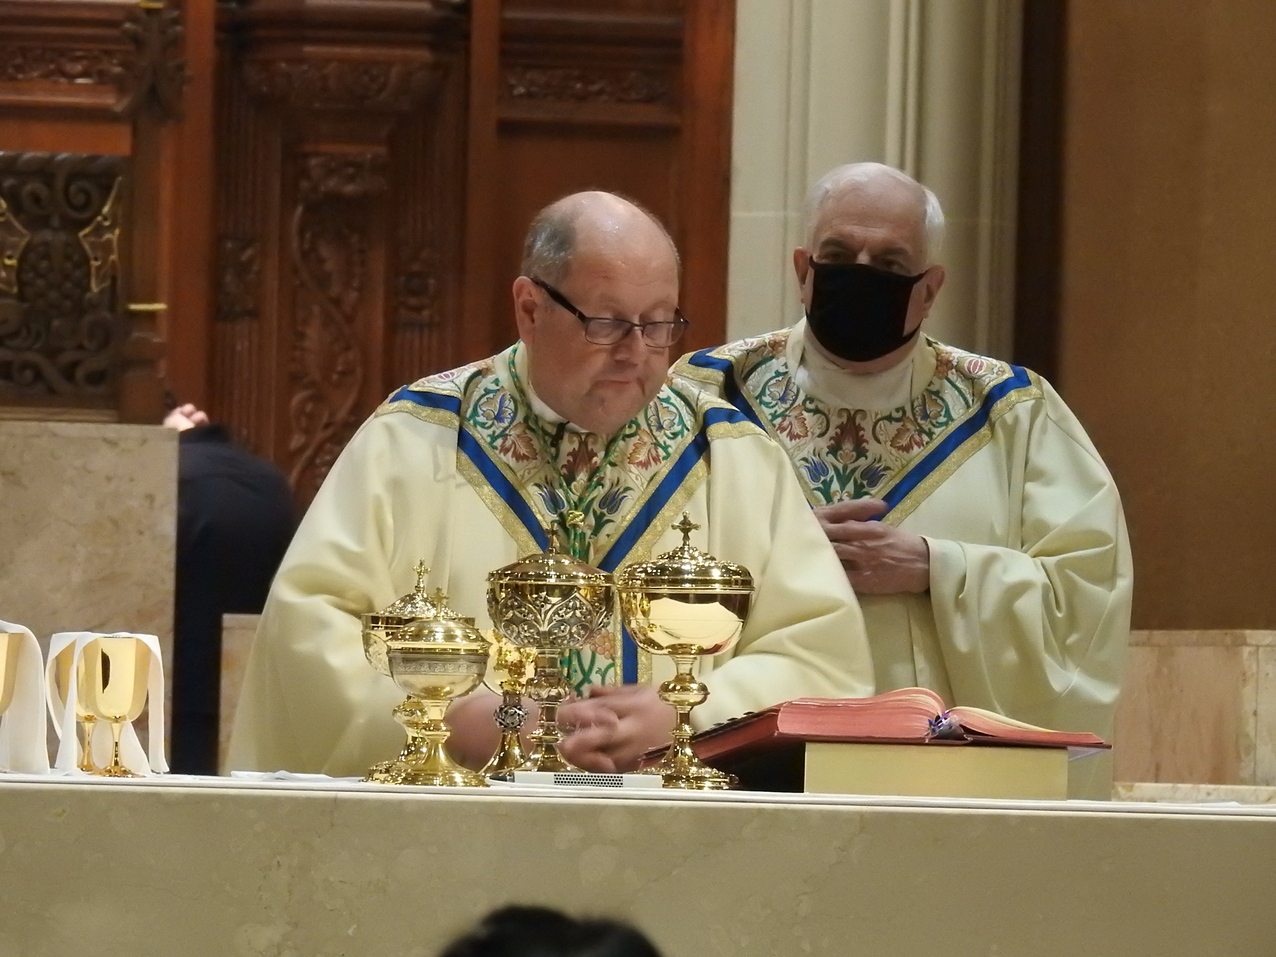 Holy Thursday celebrates the institution of the Eucharist, priesthood